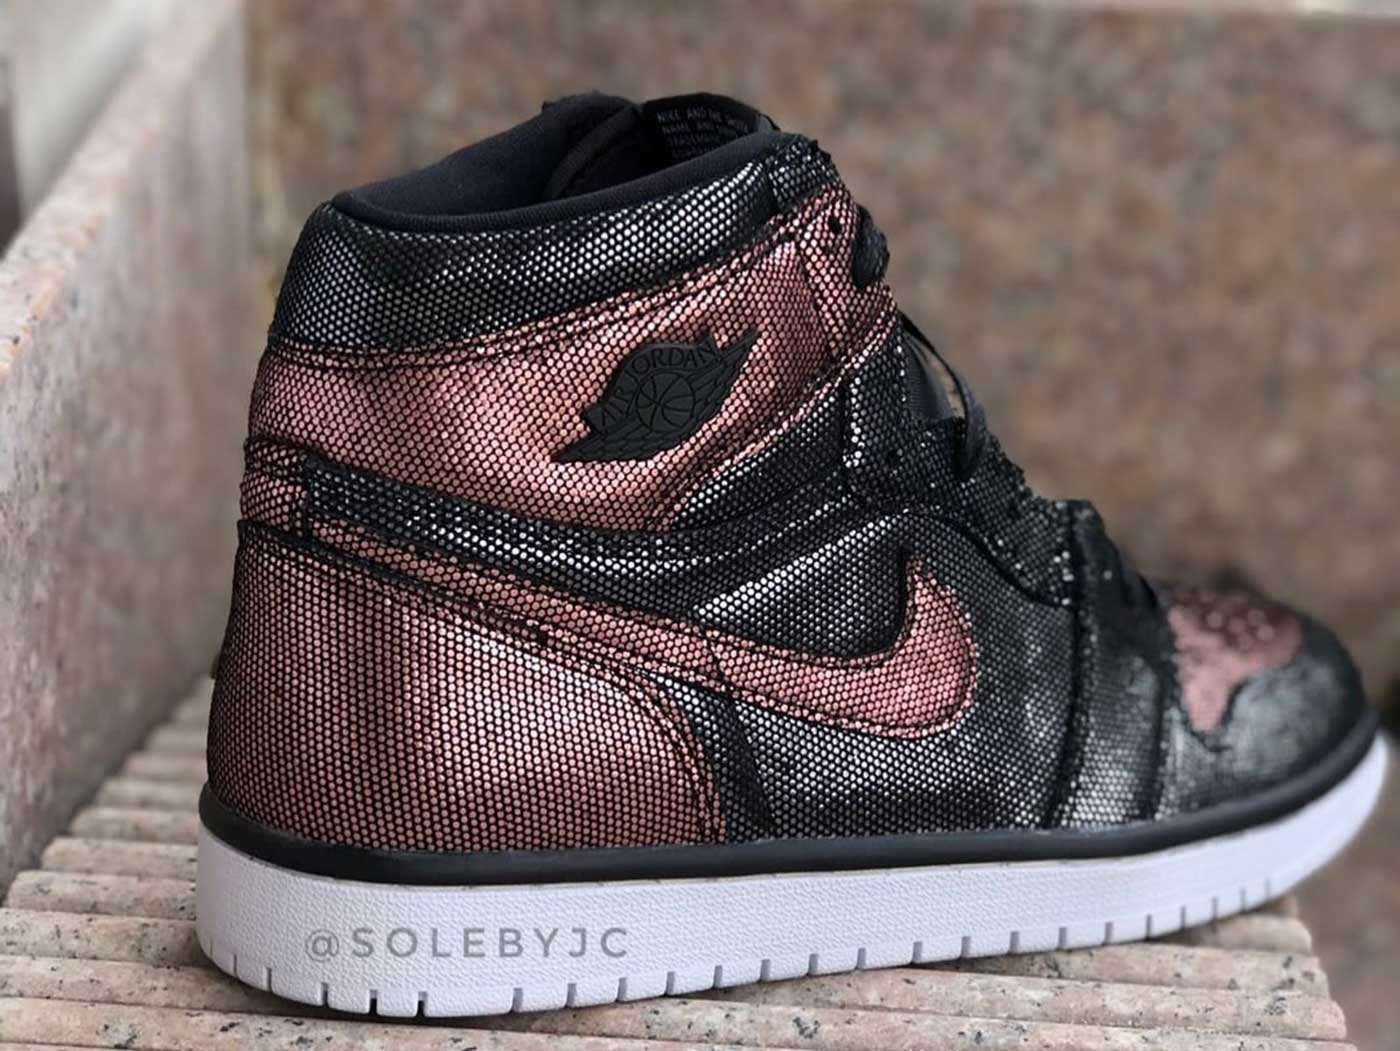 Preview: Air Jordan 1 Retro High OG WMNS Fearless - Providenceresearch